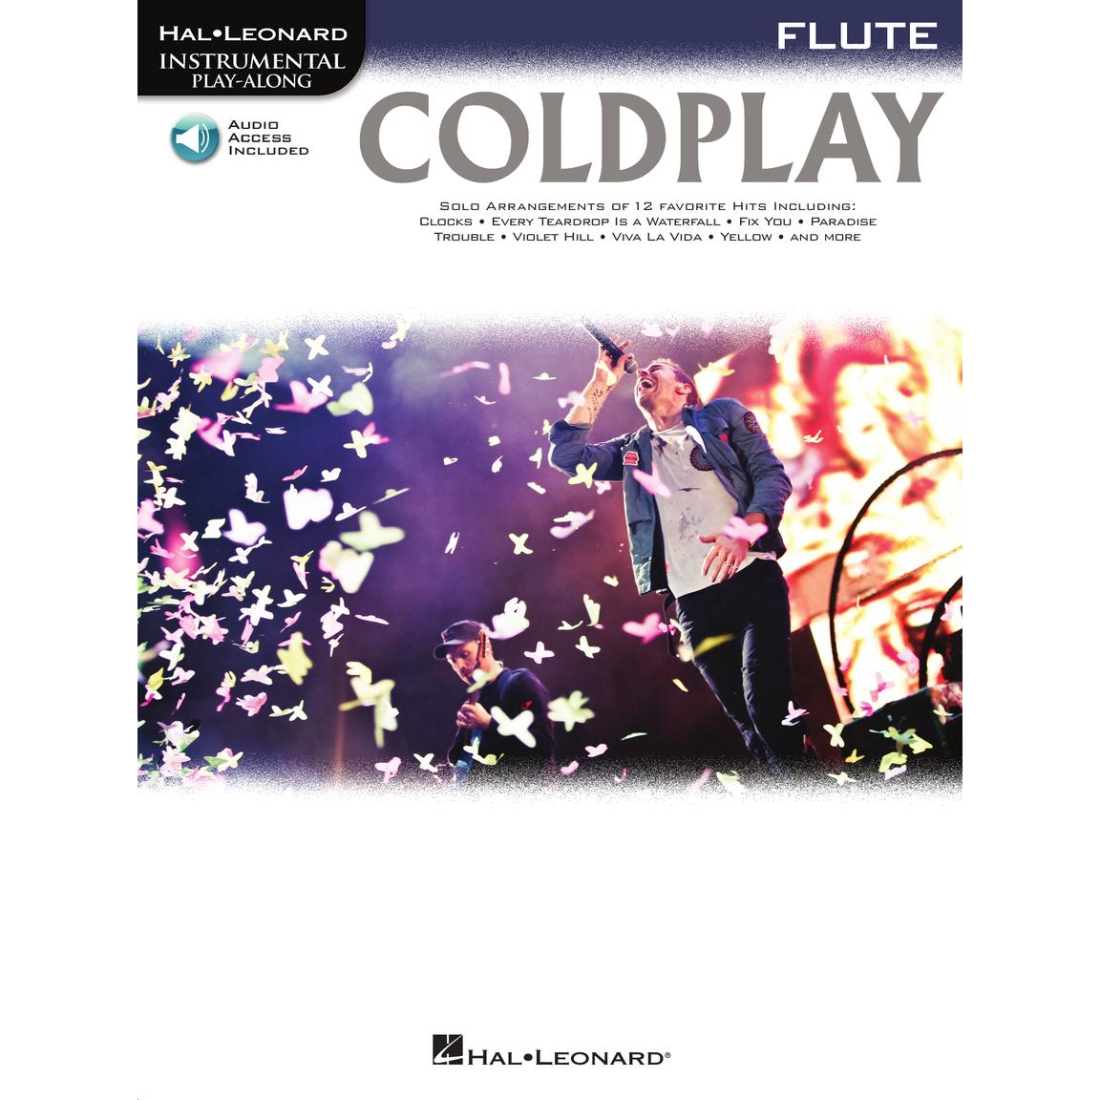 White cover with picture of Coldplay performing, titled Coldplay